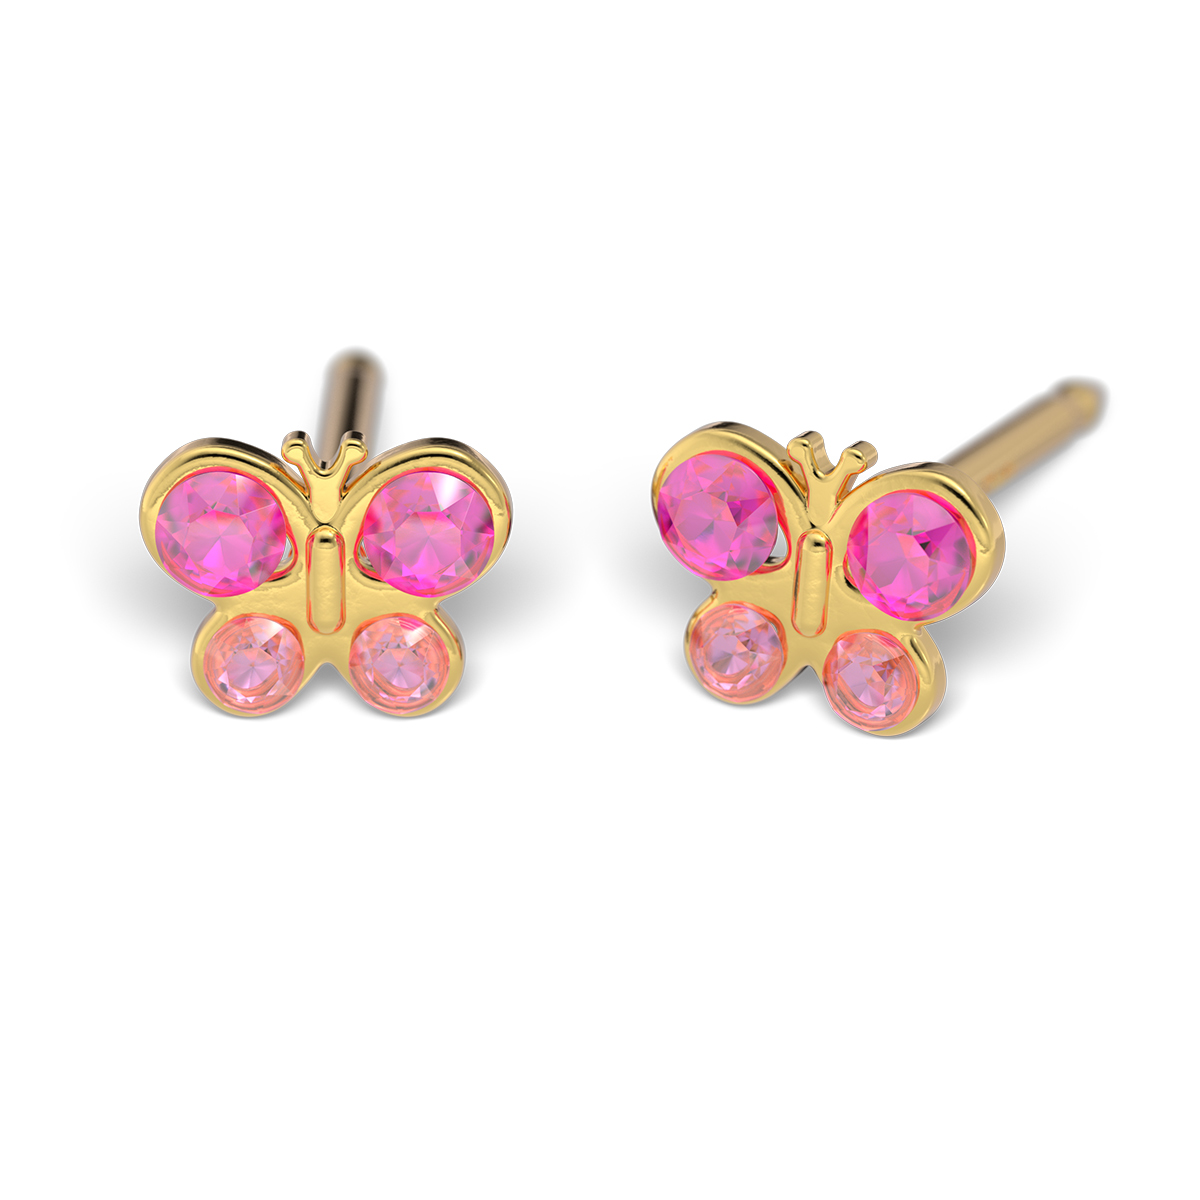 System 75 ear studs, 9 ct yellow gold